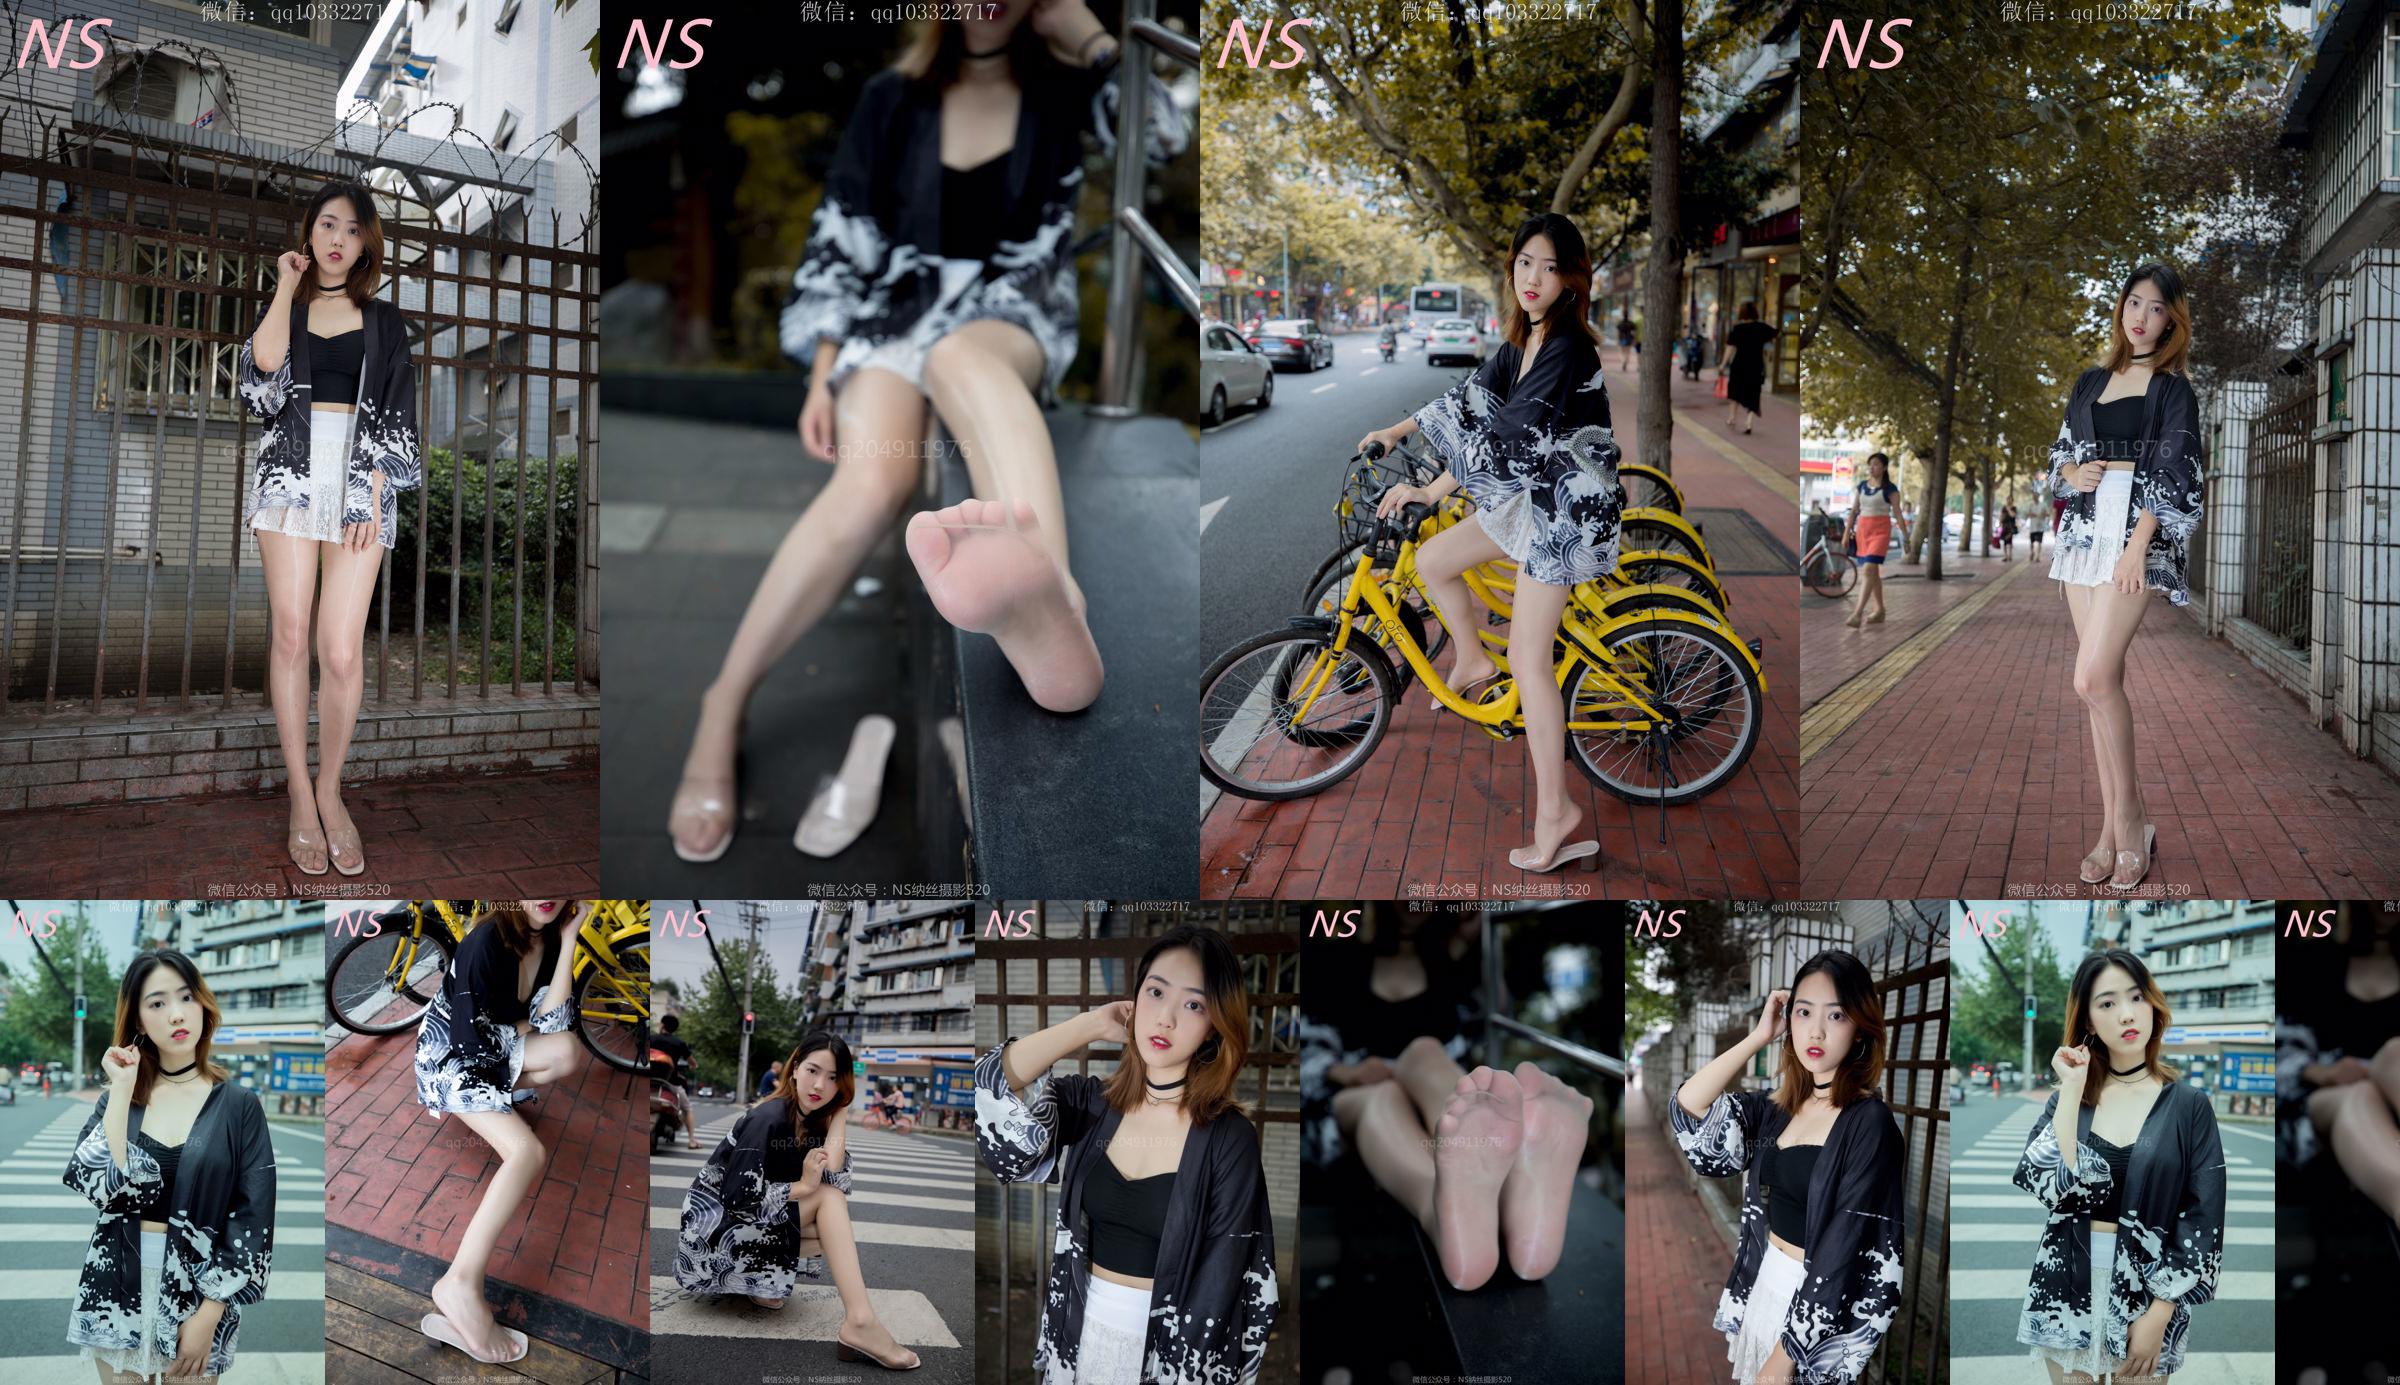 Man Wen "A Trip to a Tricycle in Flesh-colored Stockings and Beautiful Legs" [Nass Photography] No.c5f292 Page 4